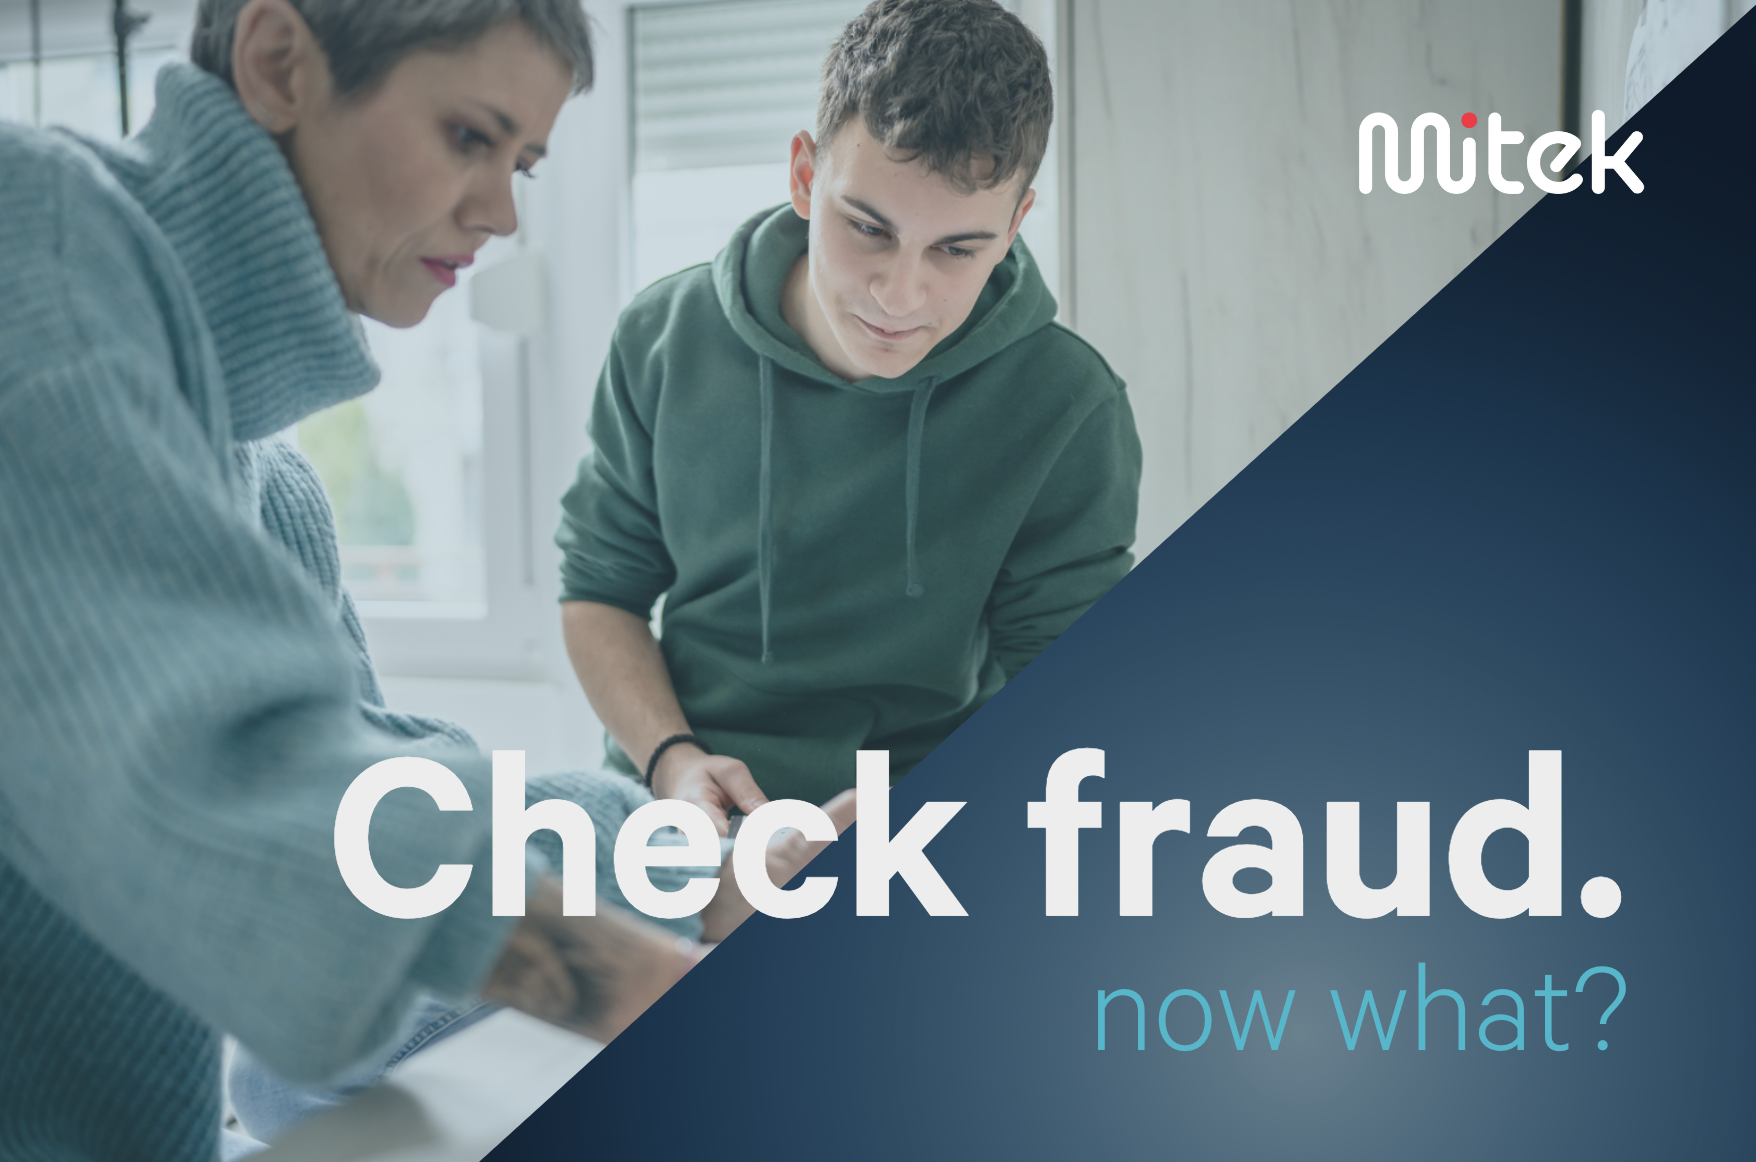 Mother helps son with check fraud